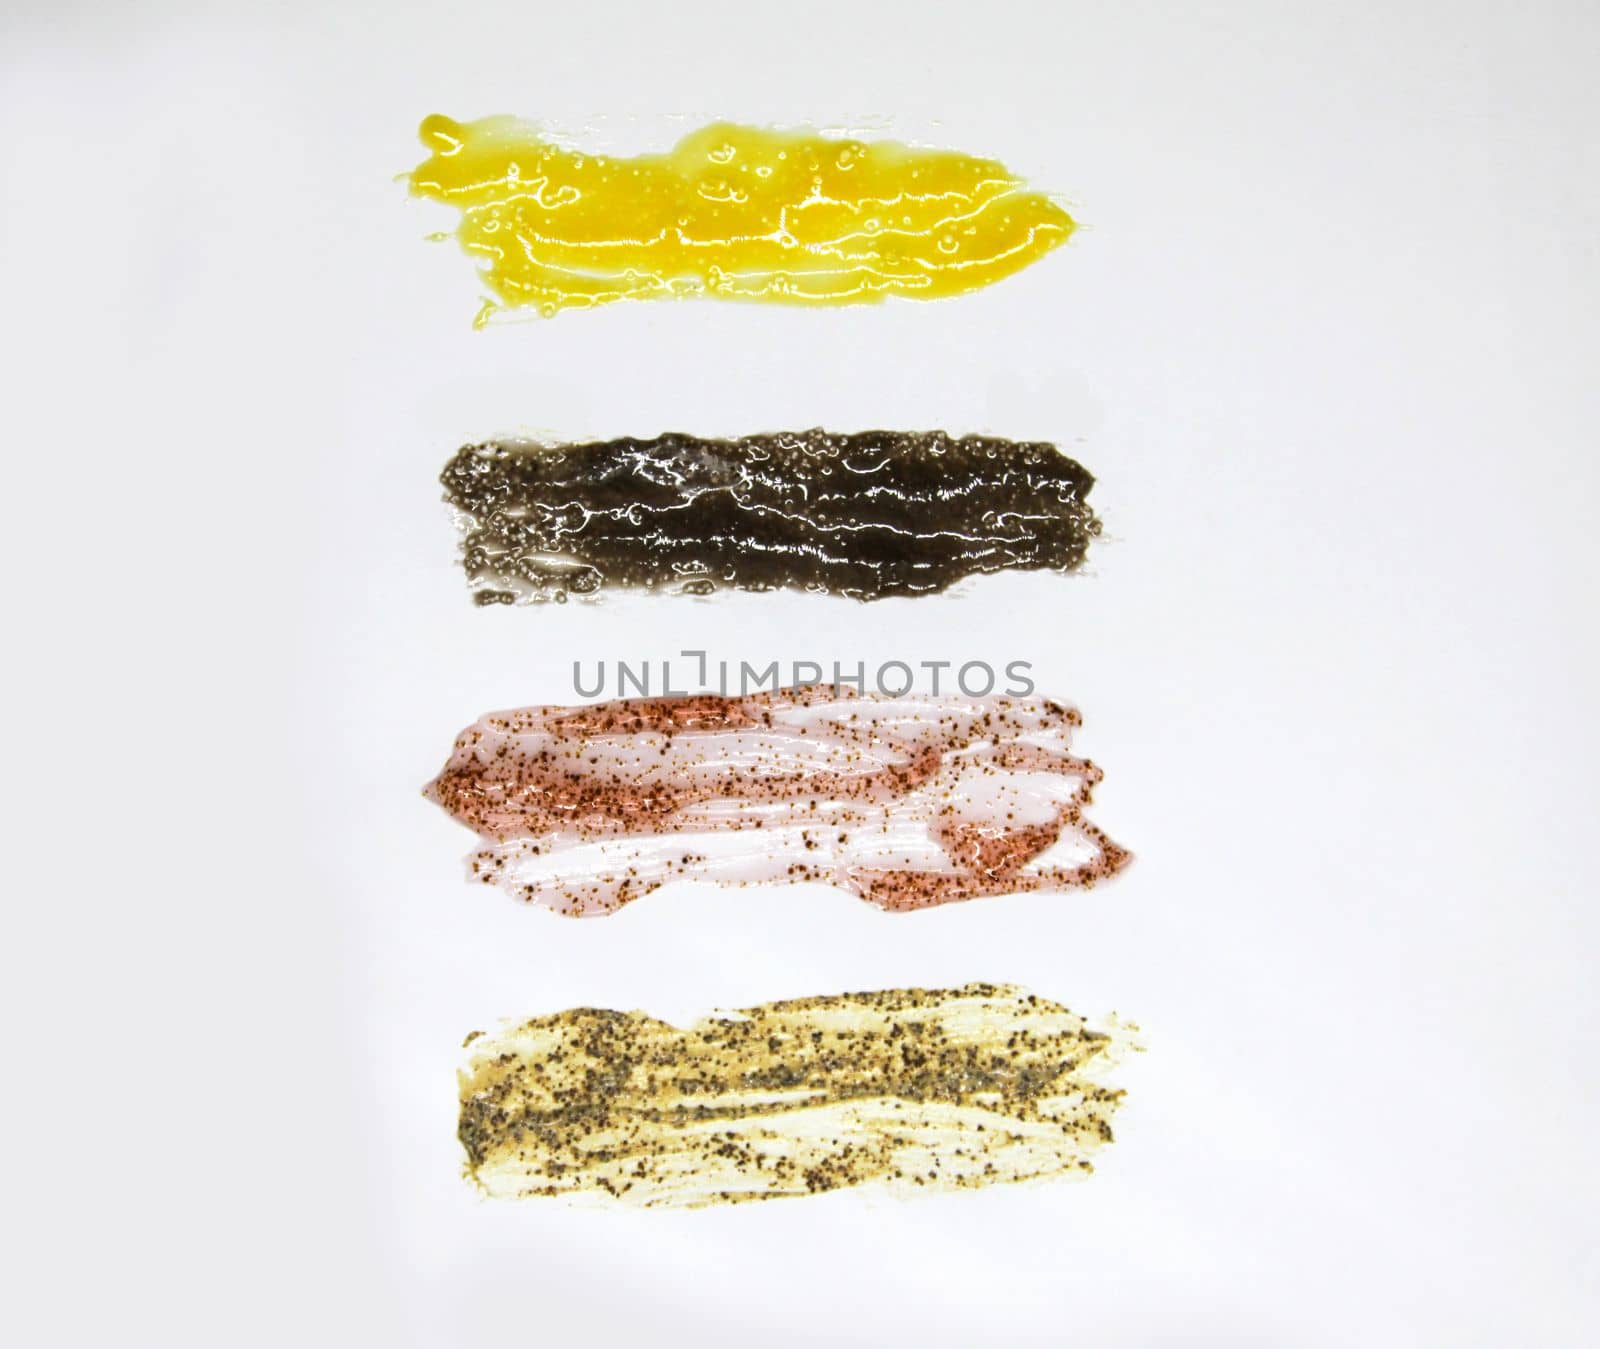 Body scrub textures. Skin care product swatch smear on white background.